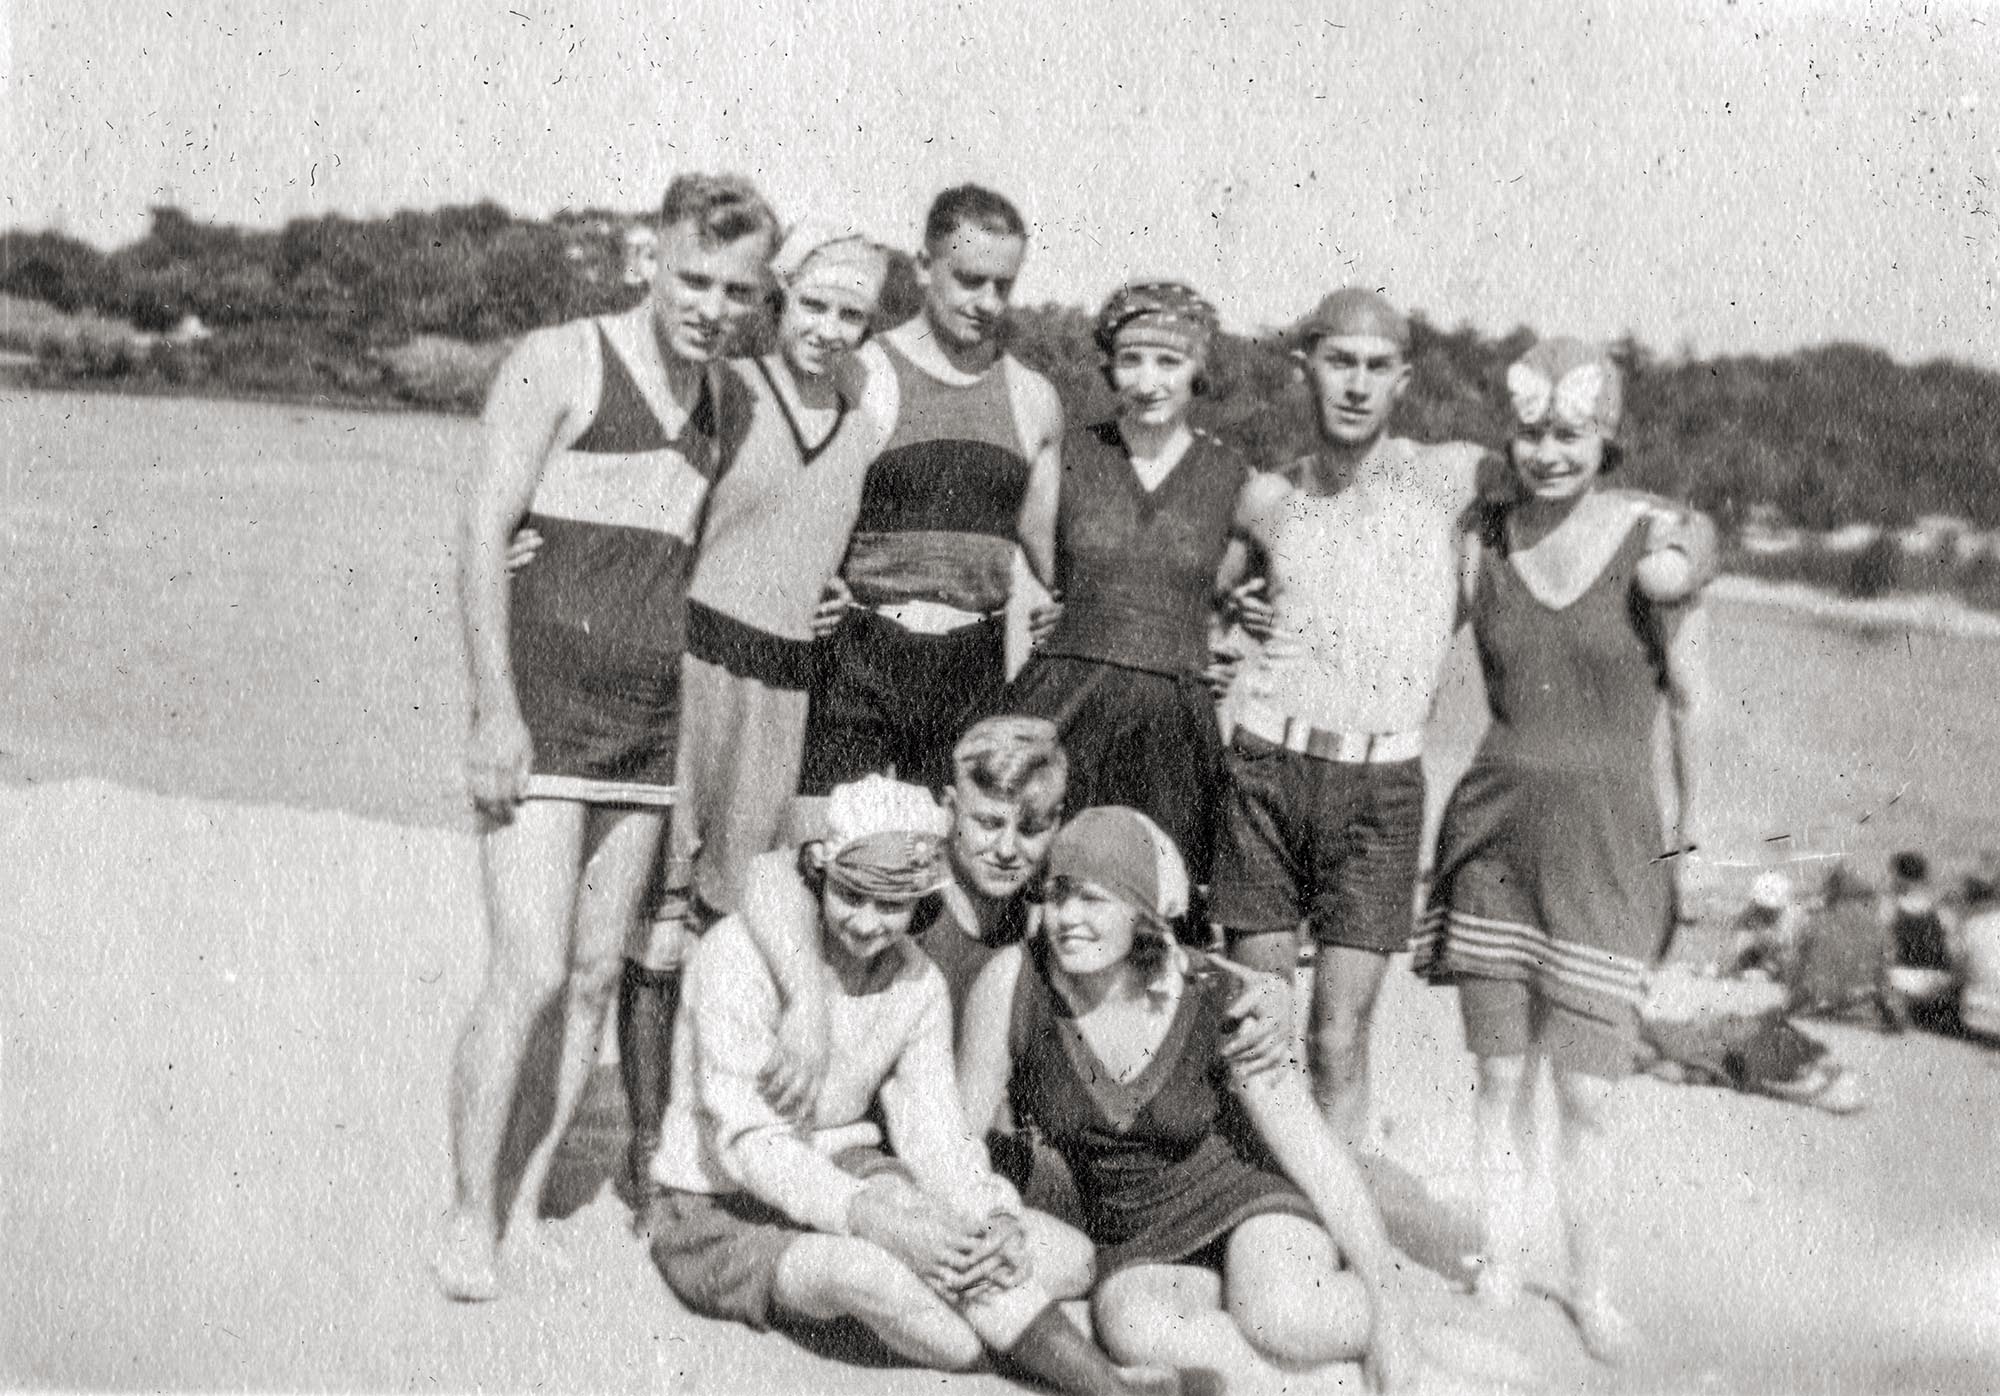 Dewey Beach, Peoria, Illinois, 1916. From the photo albums of Louise Boettger (Sluser) dated from 1915 to 1917 and a few others from the mid-1920s. Fun and whimsical snapshots and poses, Bradley University students, automobile excursions, Dewey Beach in Peoria, Illinois, boat rides and vacation trips to California and Colorado.

Louise Boettger Sluser (Nov. 2, 1897 - March 5, 1994). Born Nov. 2, 1897, in Peoria to Robert and Anna Vonachen Boettger, she married Miles B. “Bert” Sluser on Feb. 22, 1923, in Peoria, Illinois.